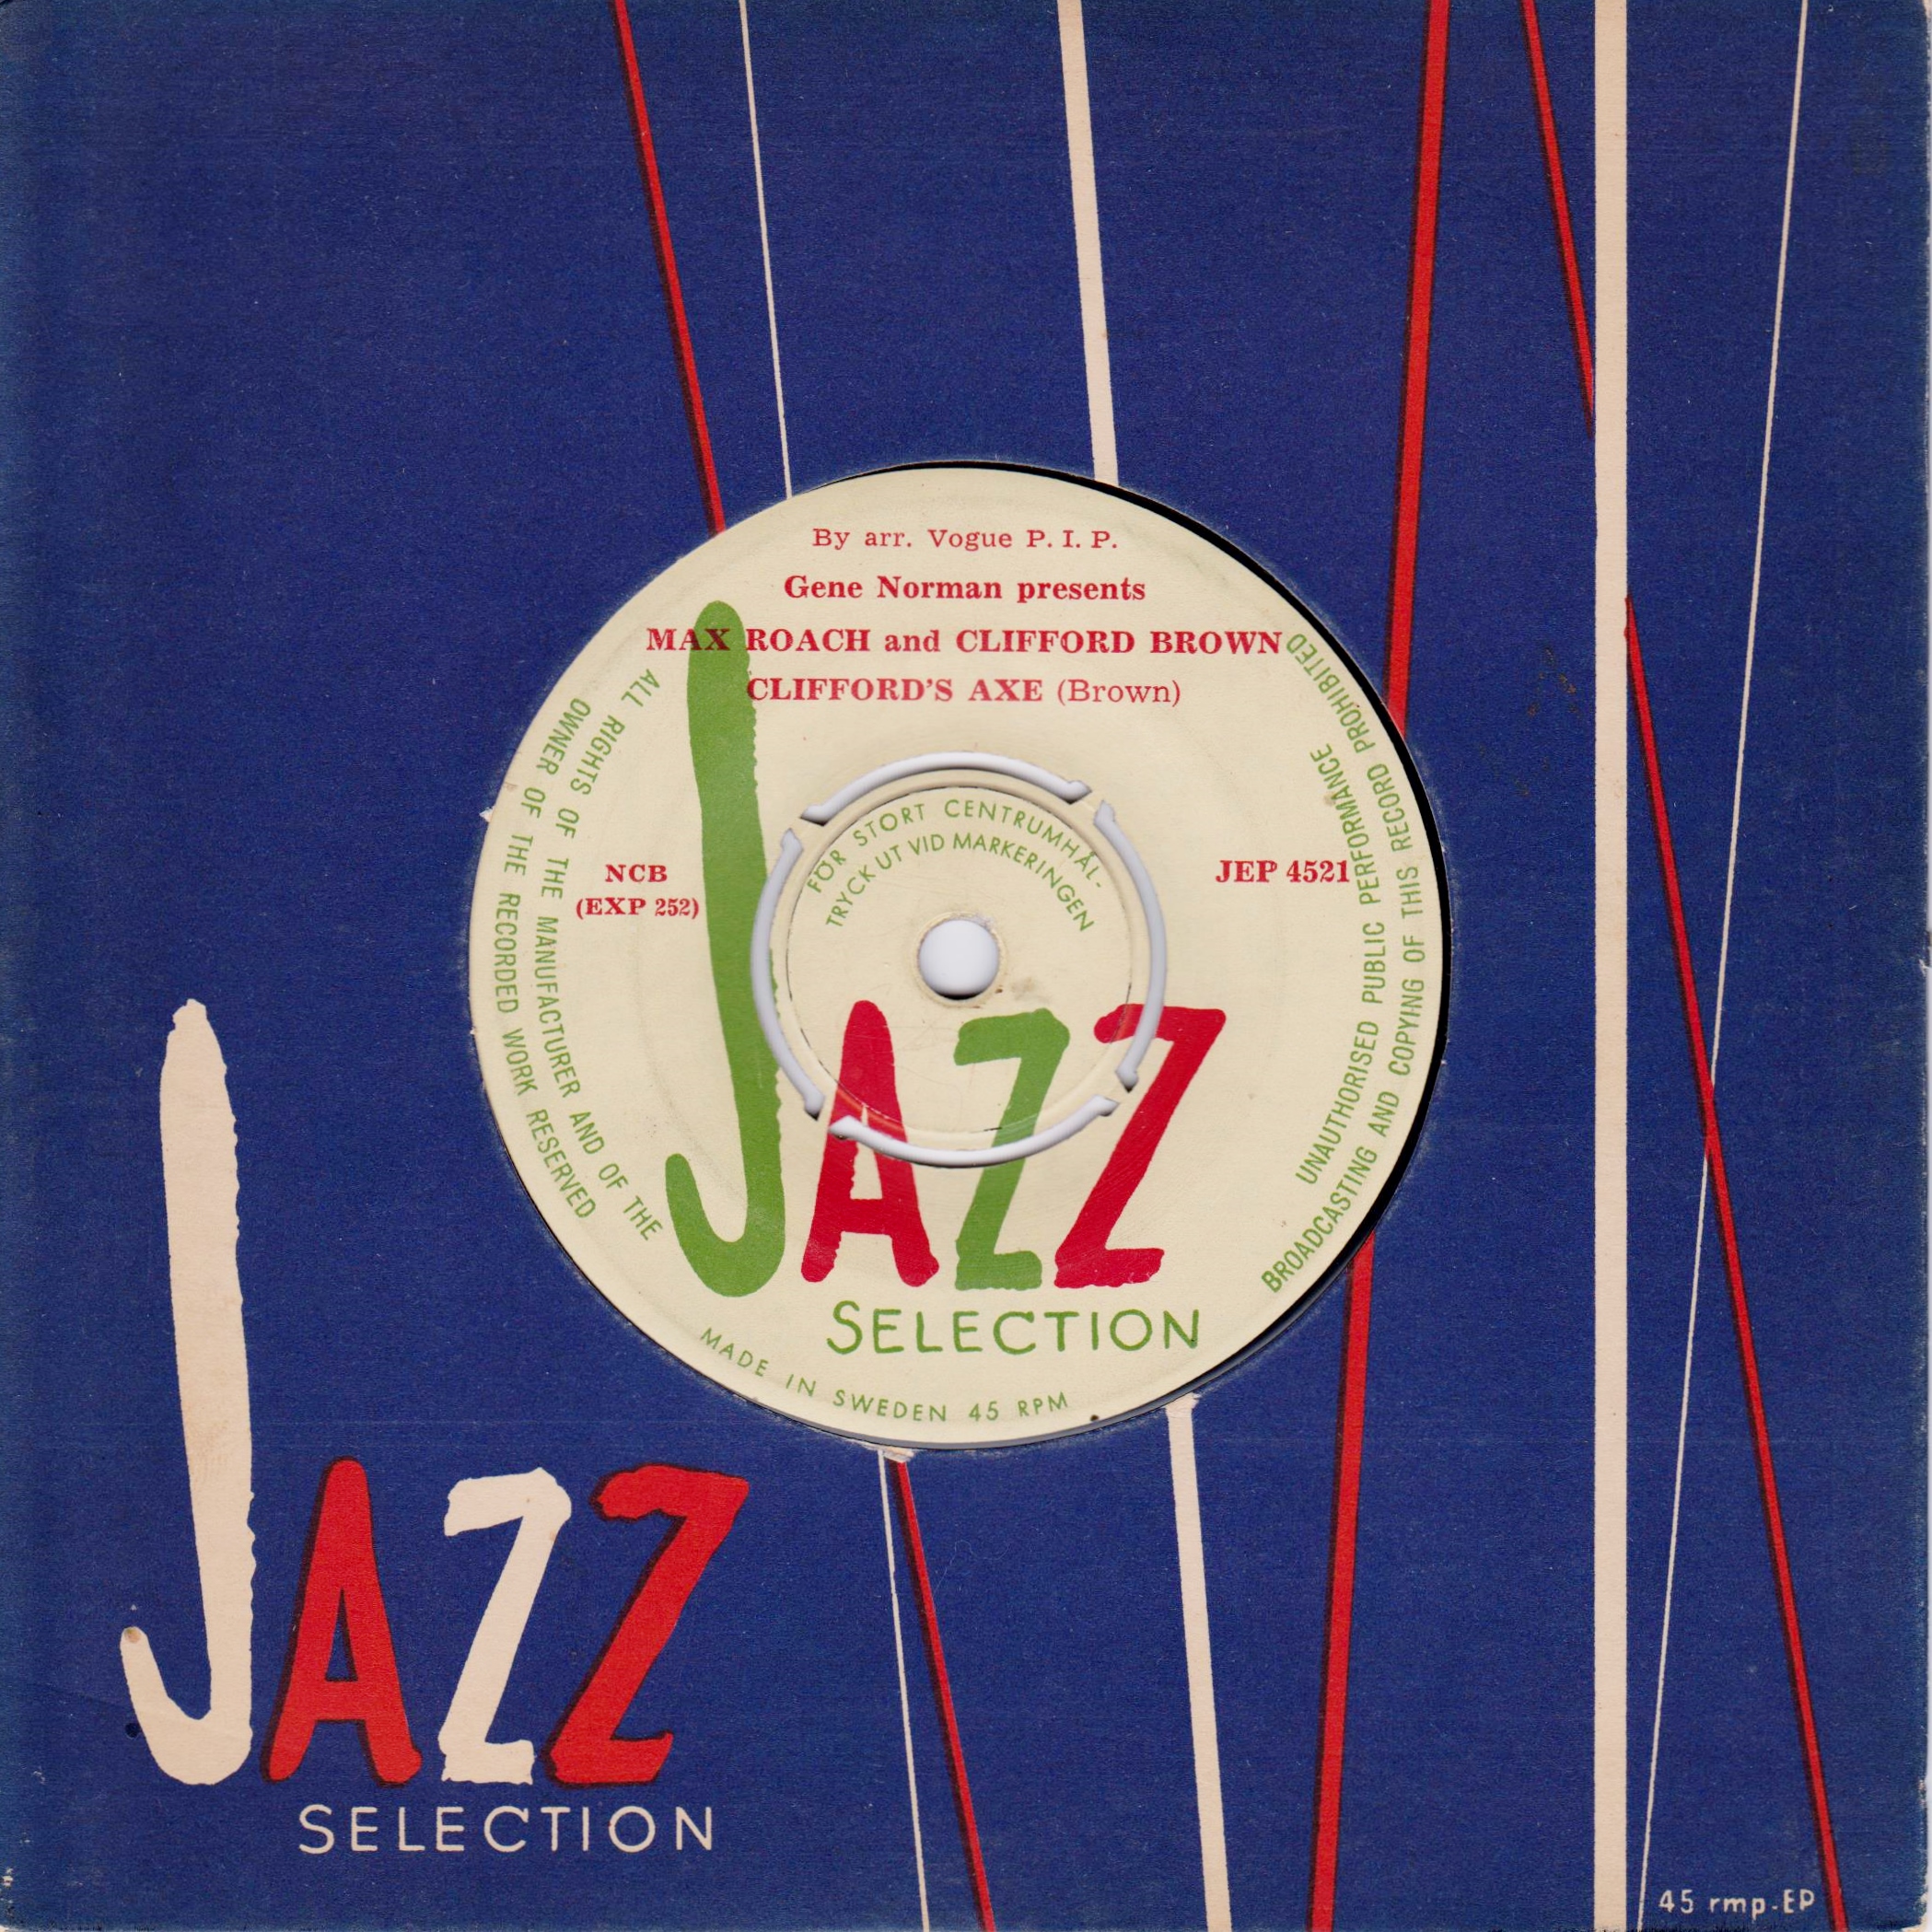 Max Roach and Clifford Brown, Jazz Selection JEP 4521